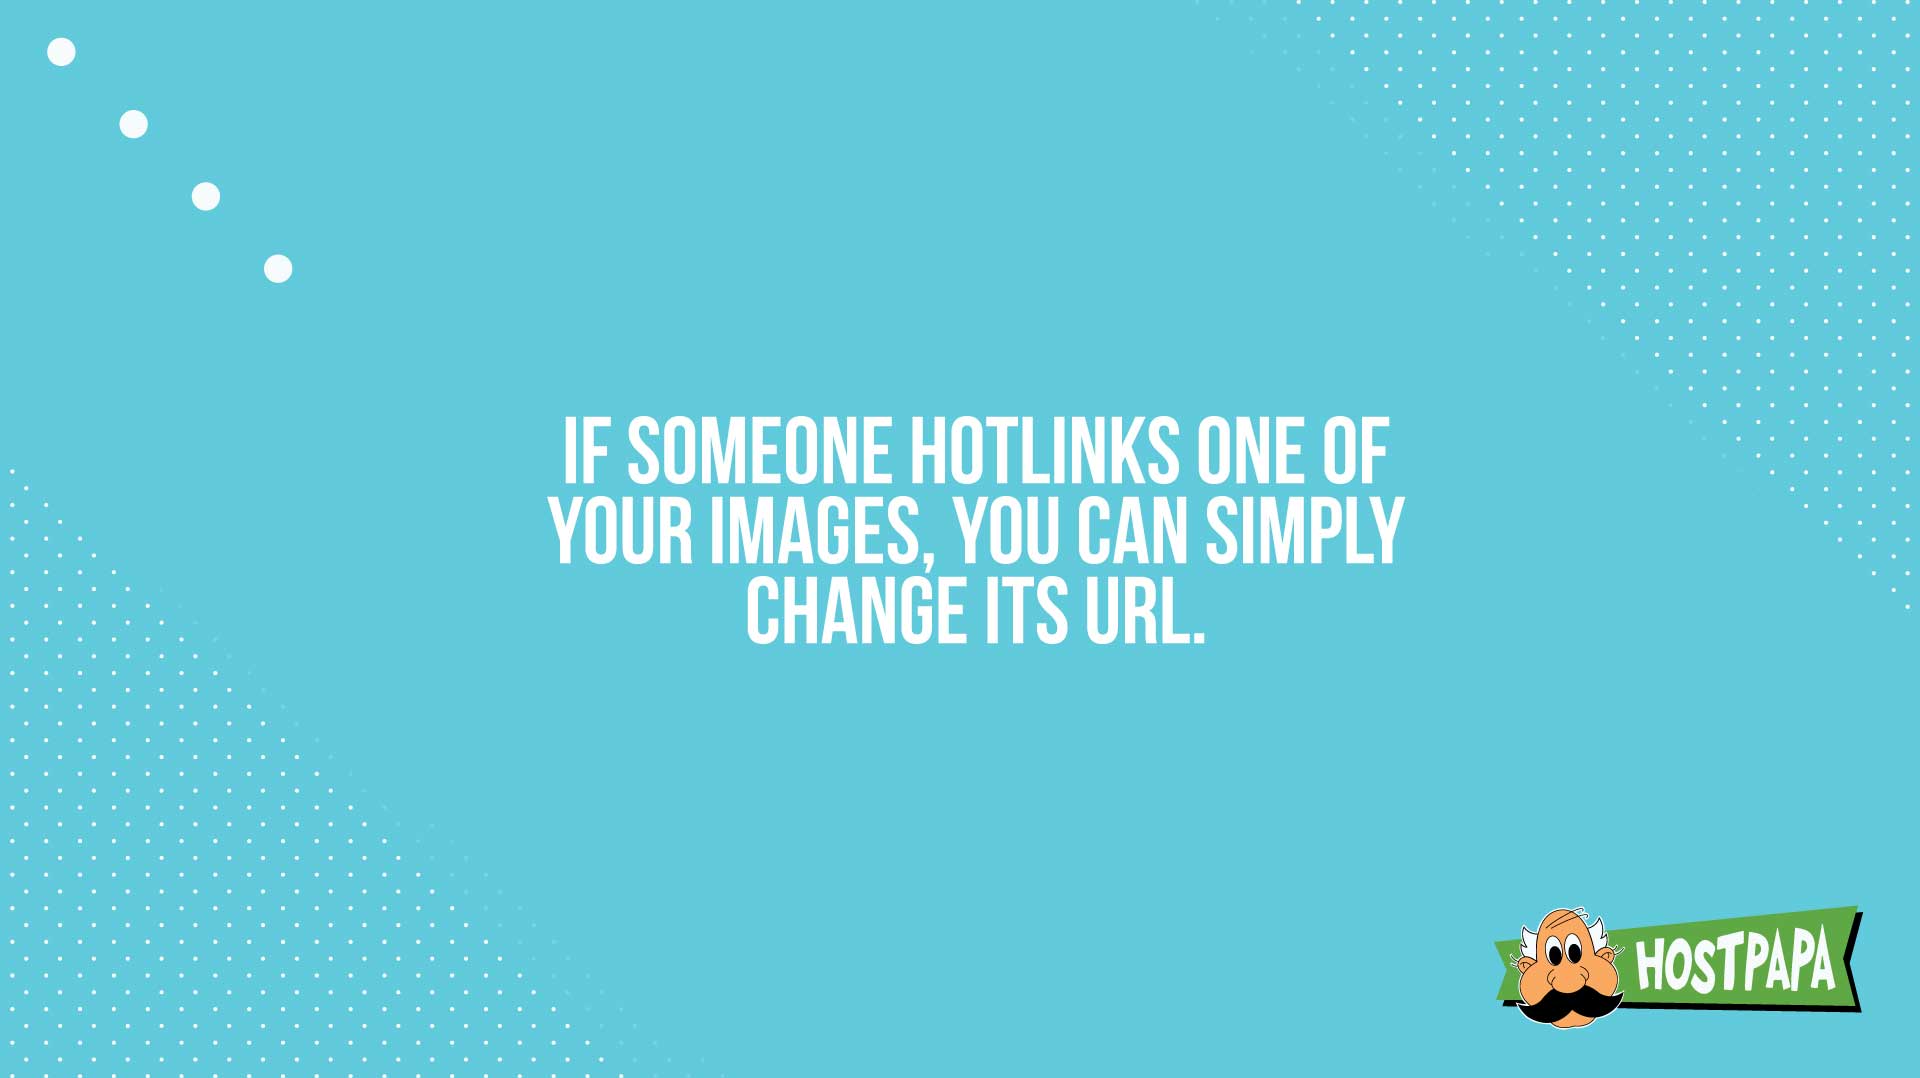 If someone hotlinks one of your images, you can simply change its url.